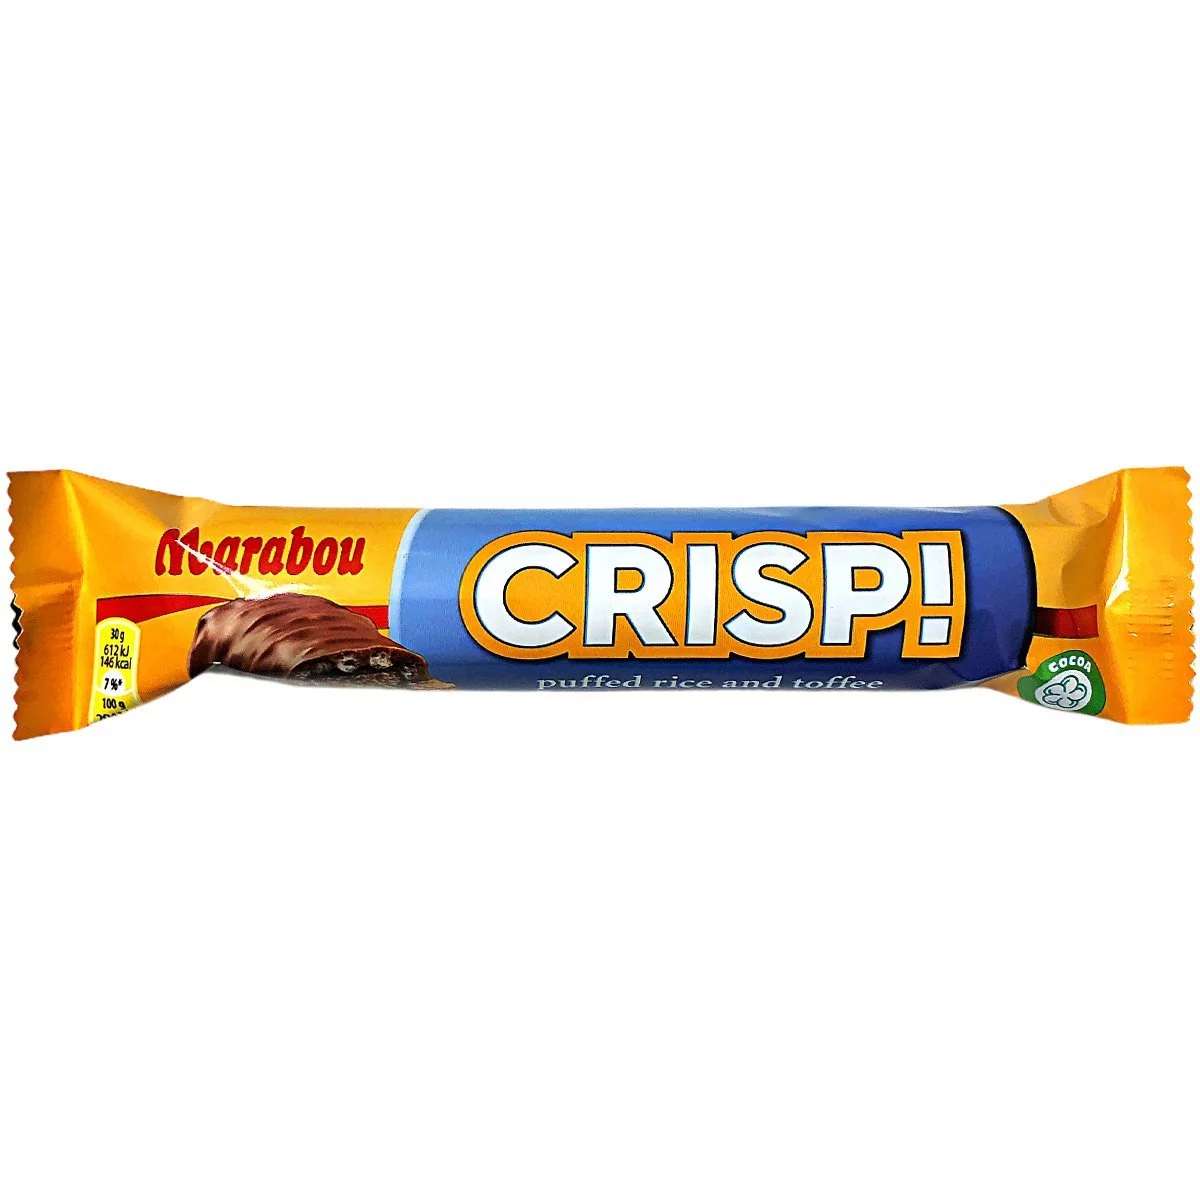 Marabou Crisp puffed rice and toffee (60g) 1